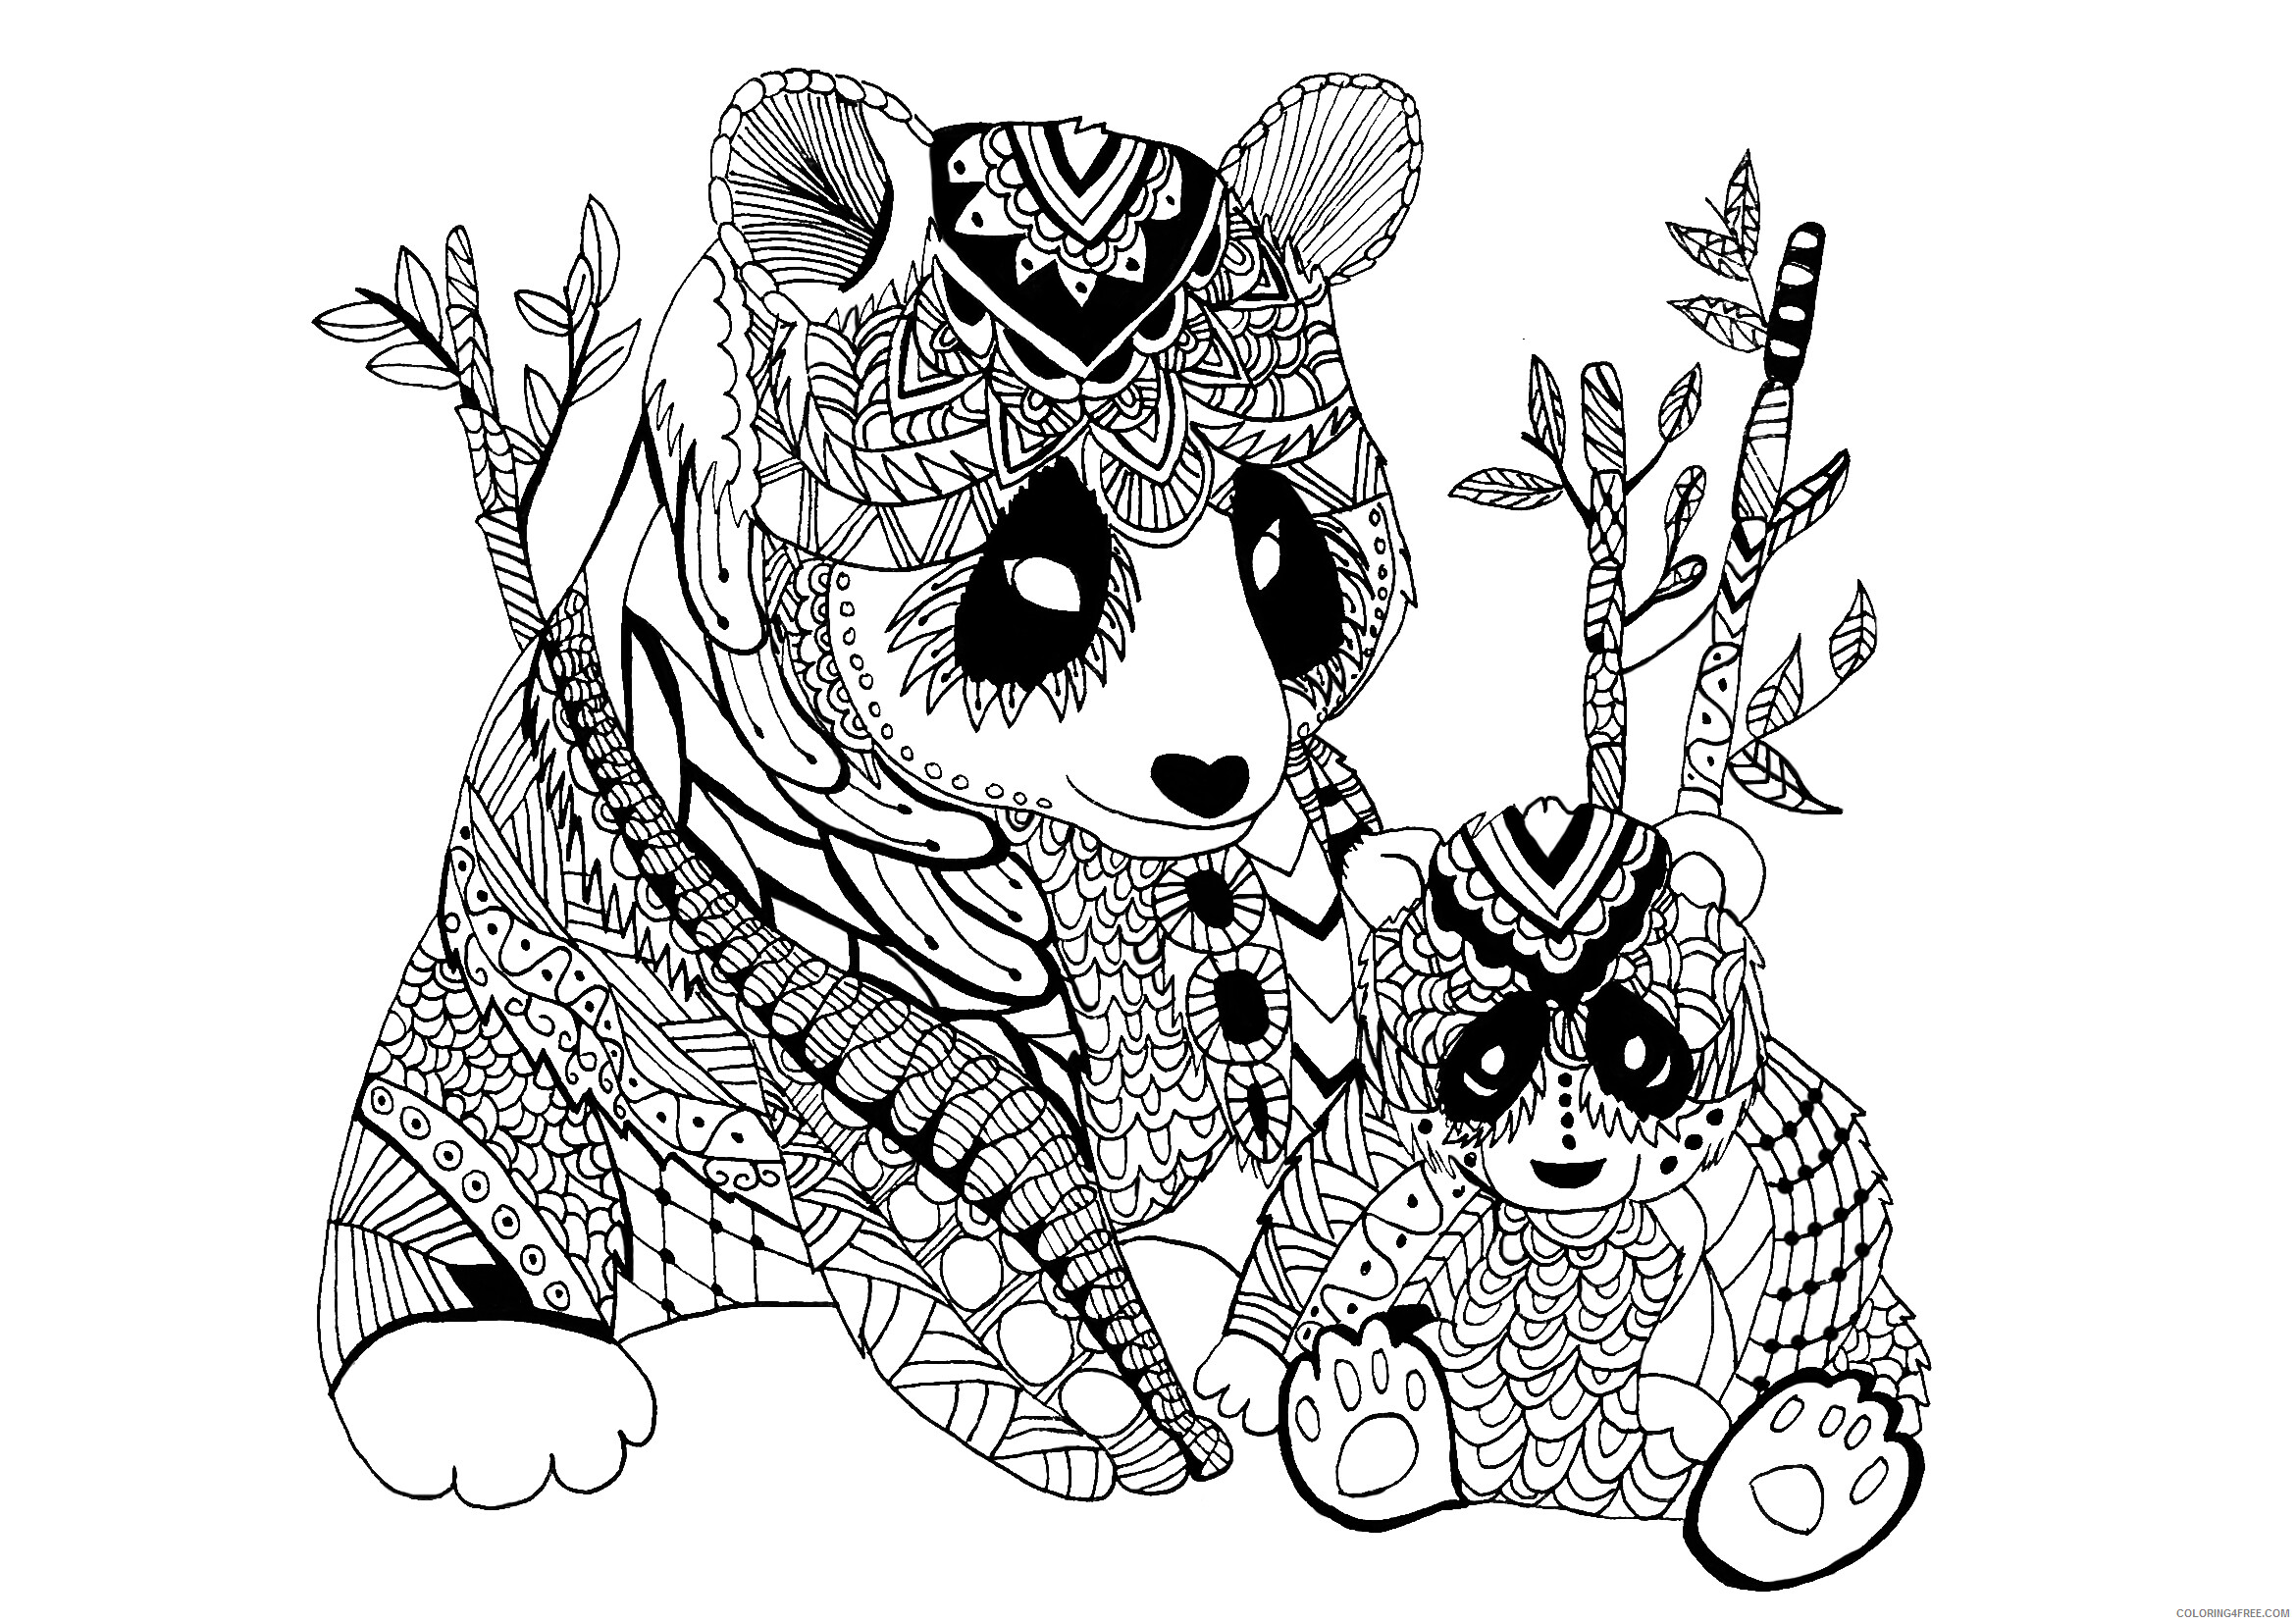 Animal Zentangle Coloring Pages adults panda zentangle celine Printable 2020 154 Coloring4free